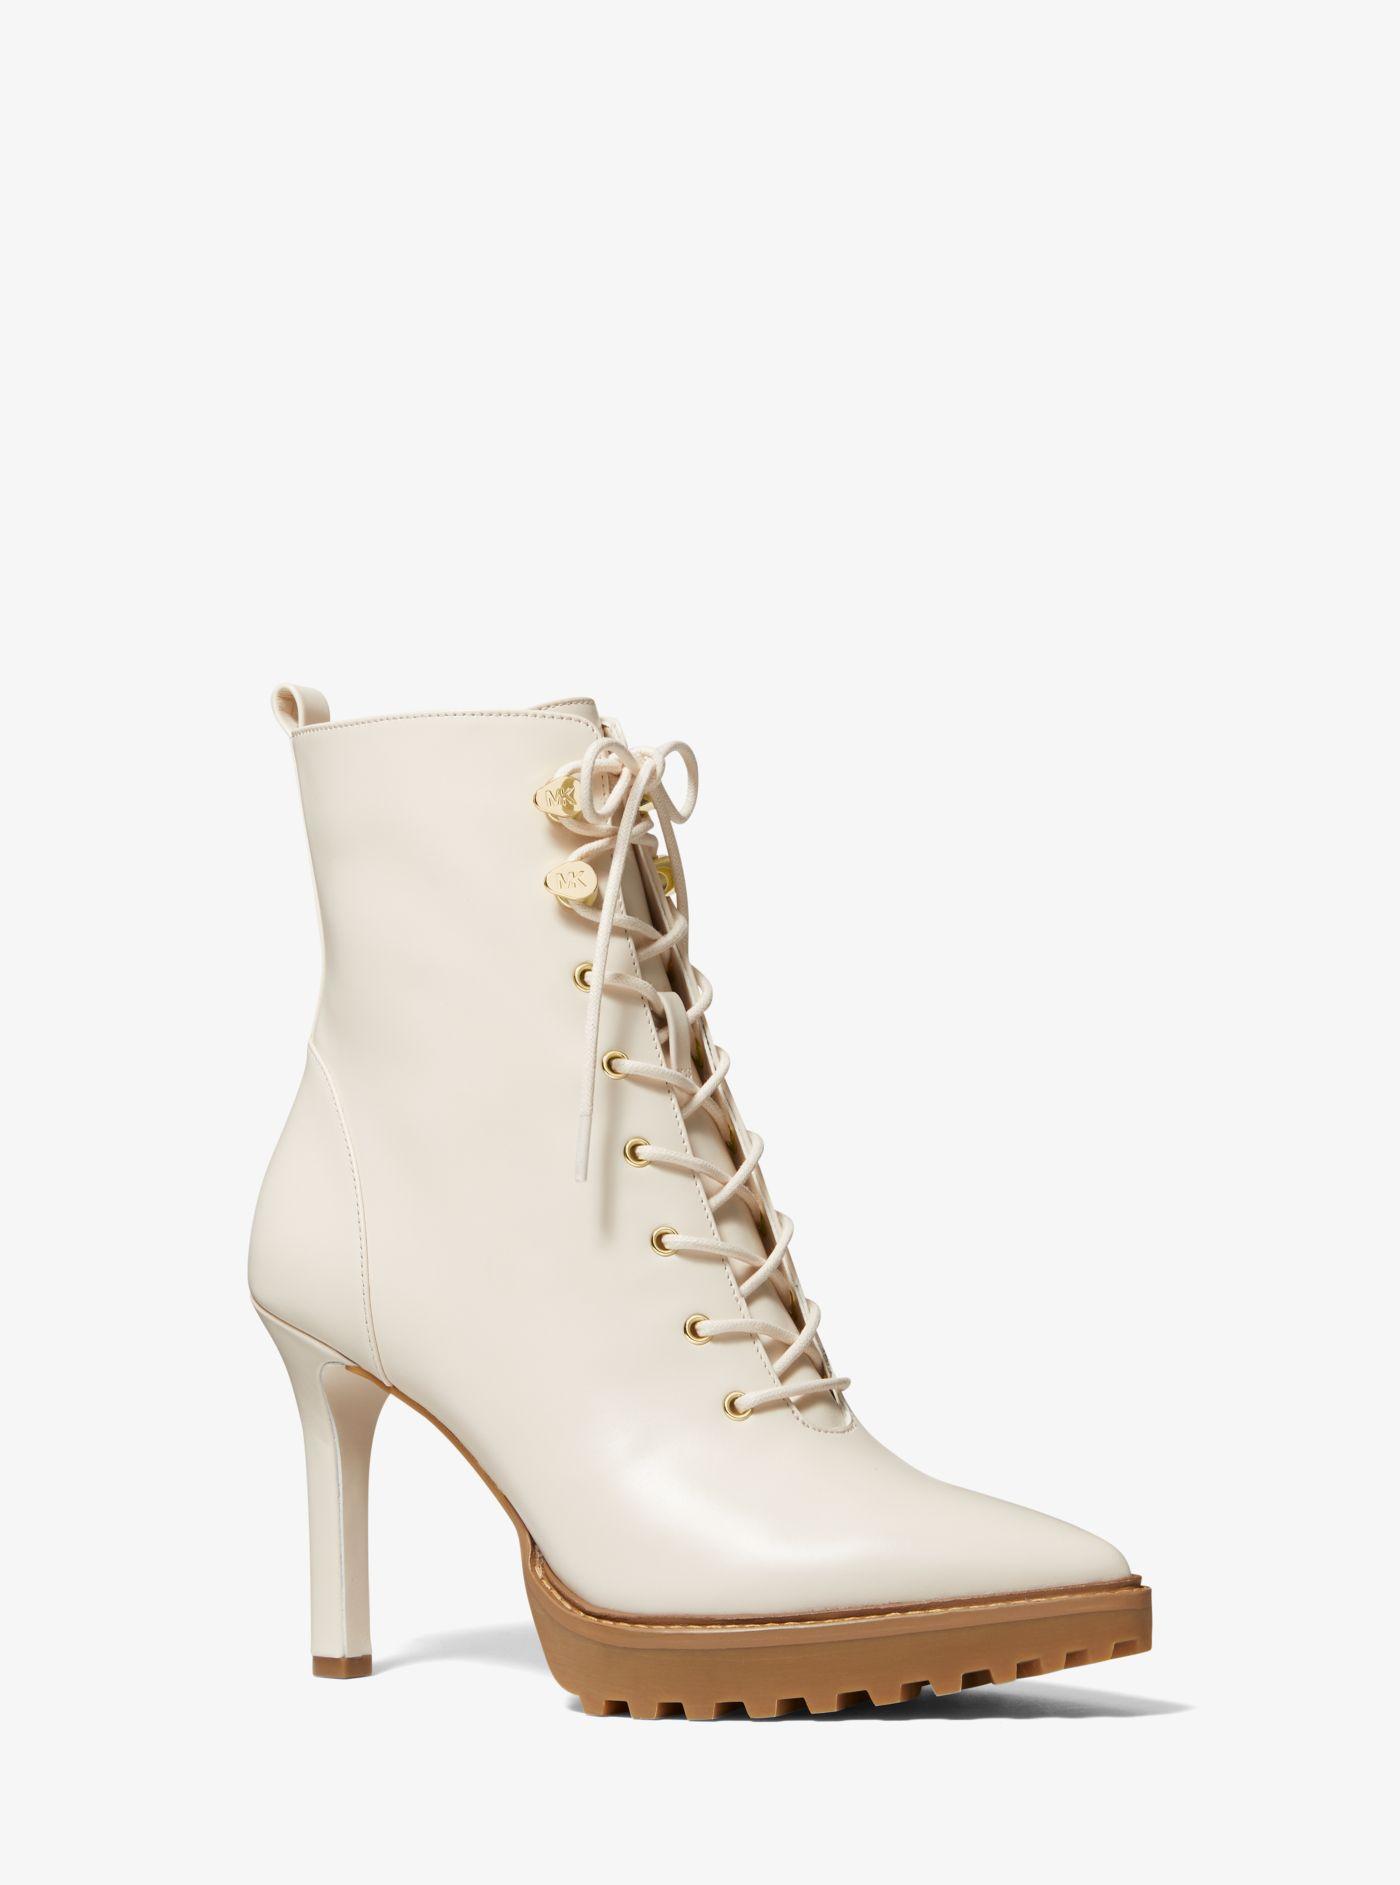 Michael Kors Kyle Leather Lace-up Boot in Natural | Lyst